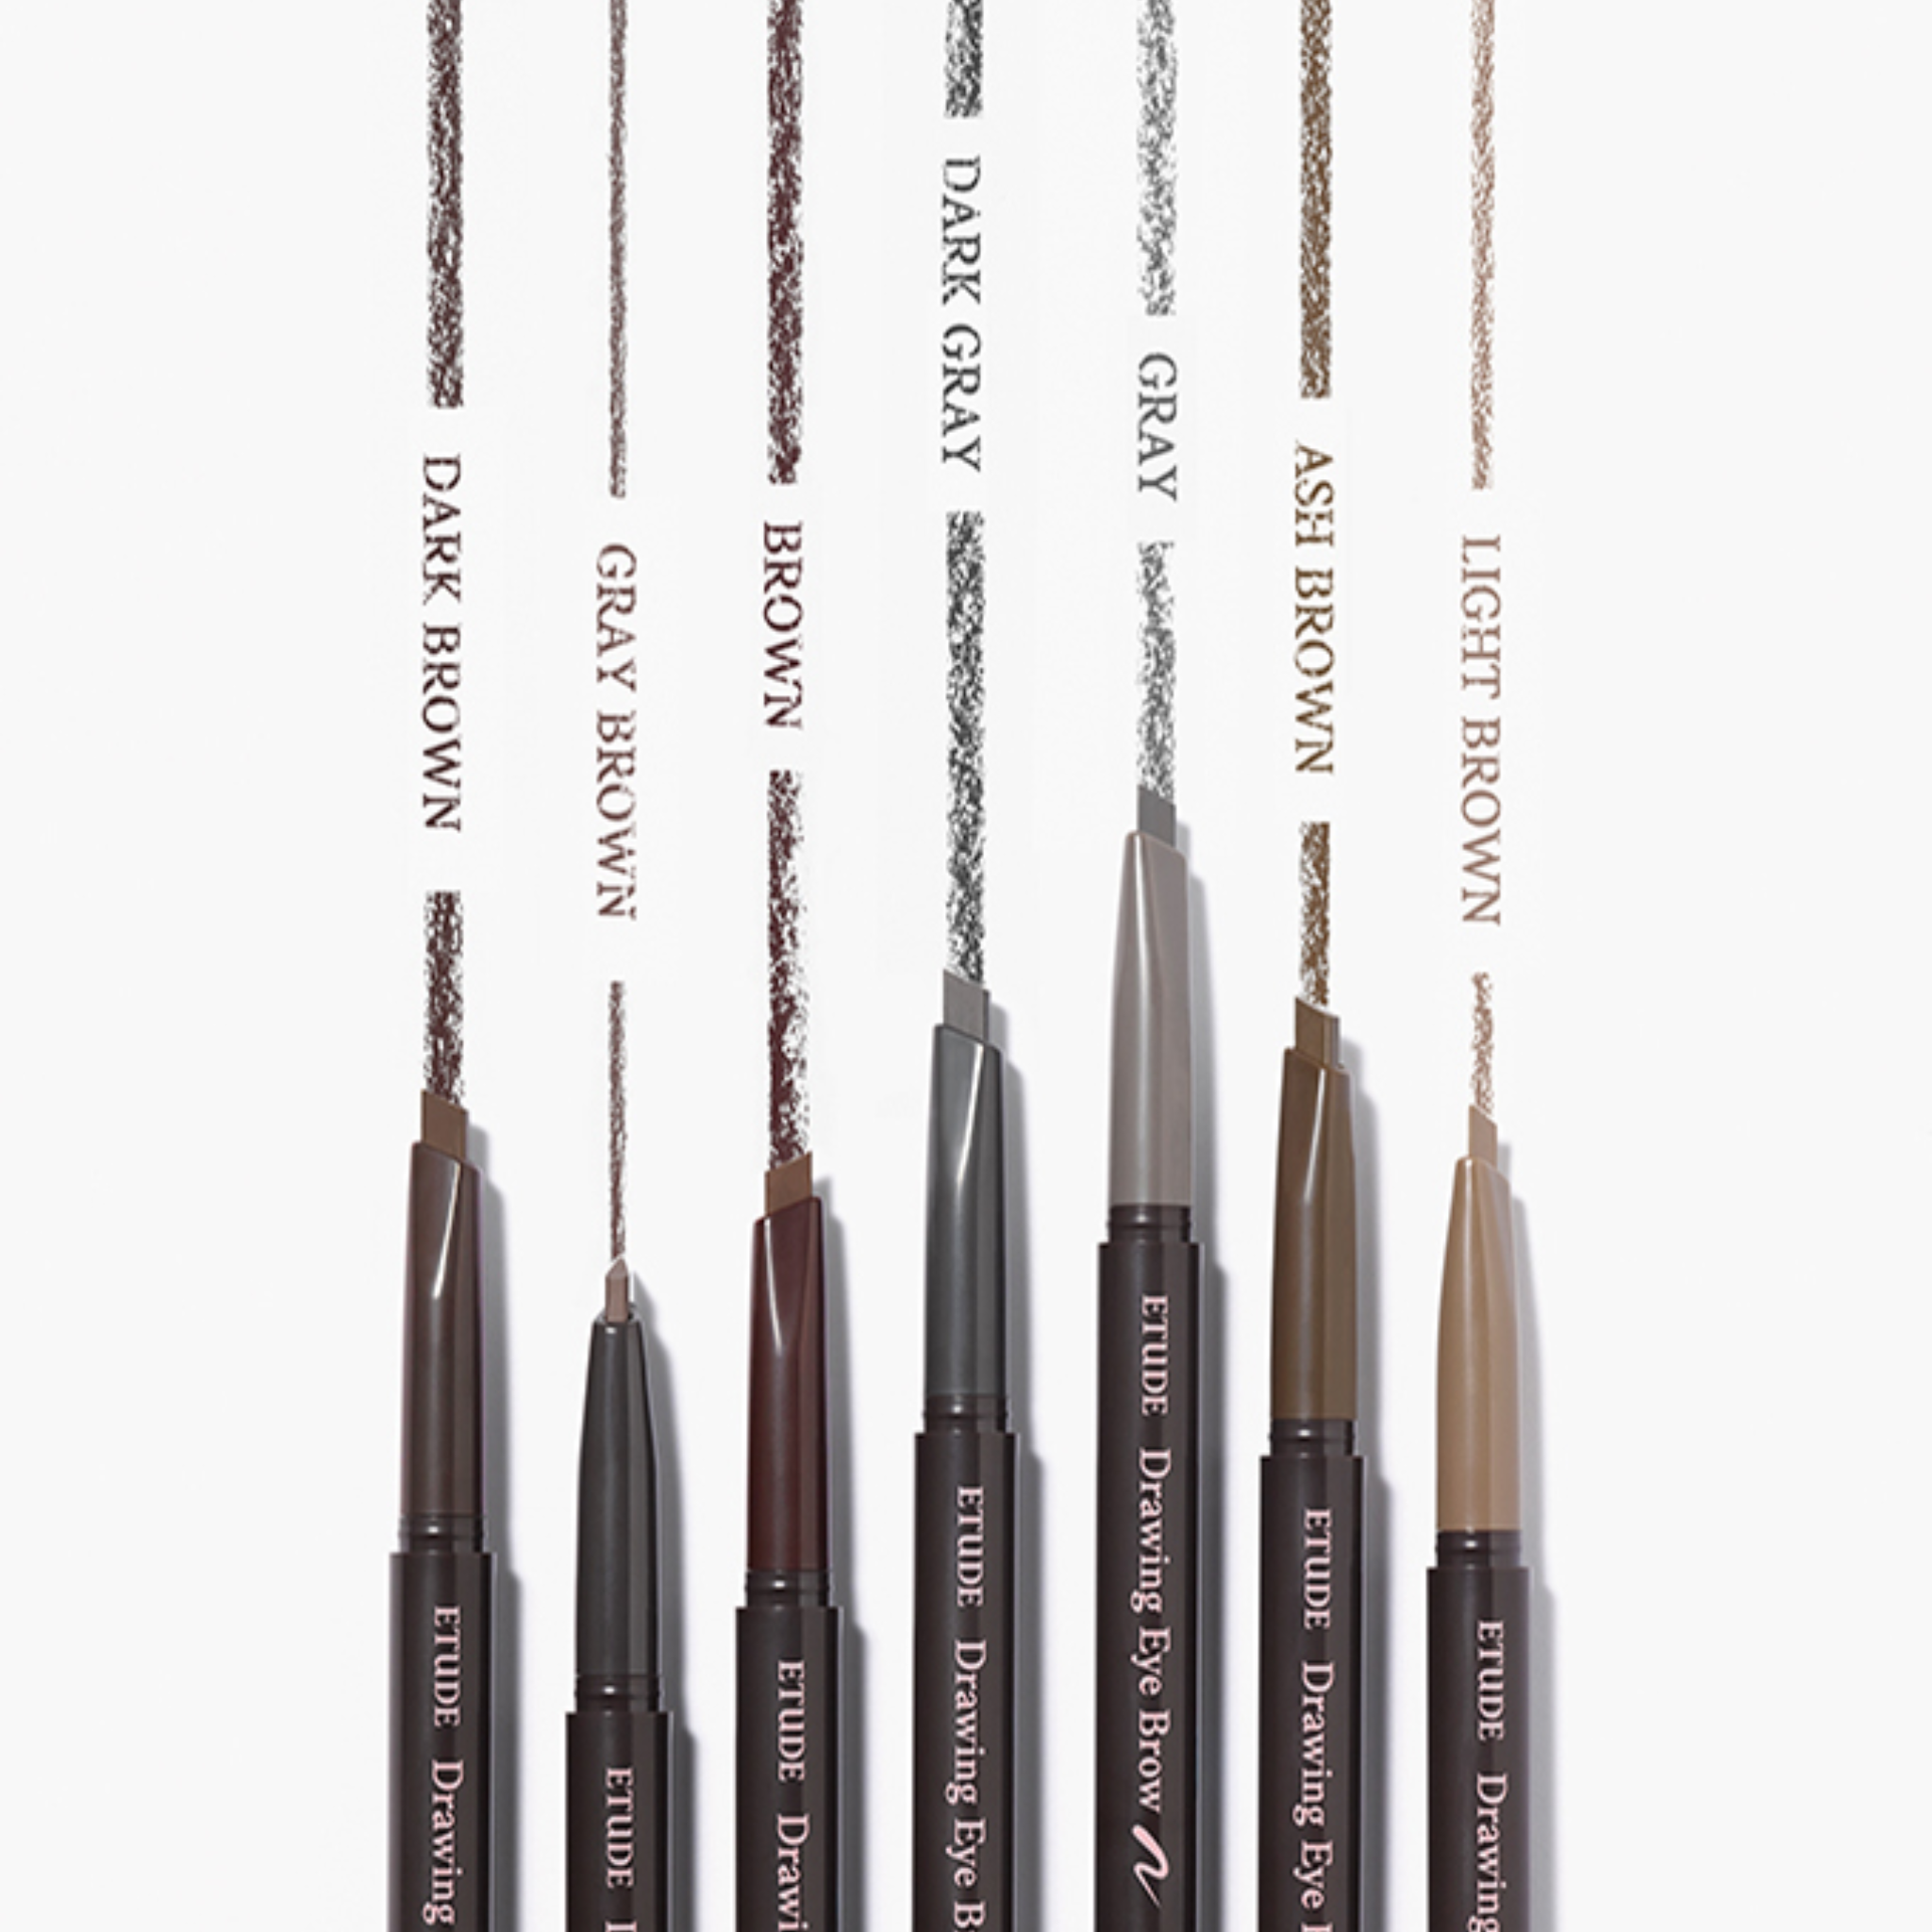 ETUDE HOUSE Drawing Eye Brow (6 colours)swatches